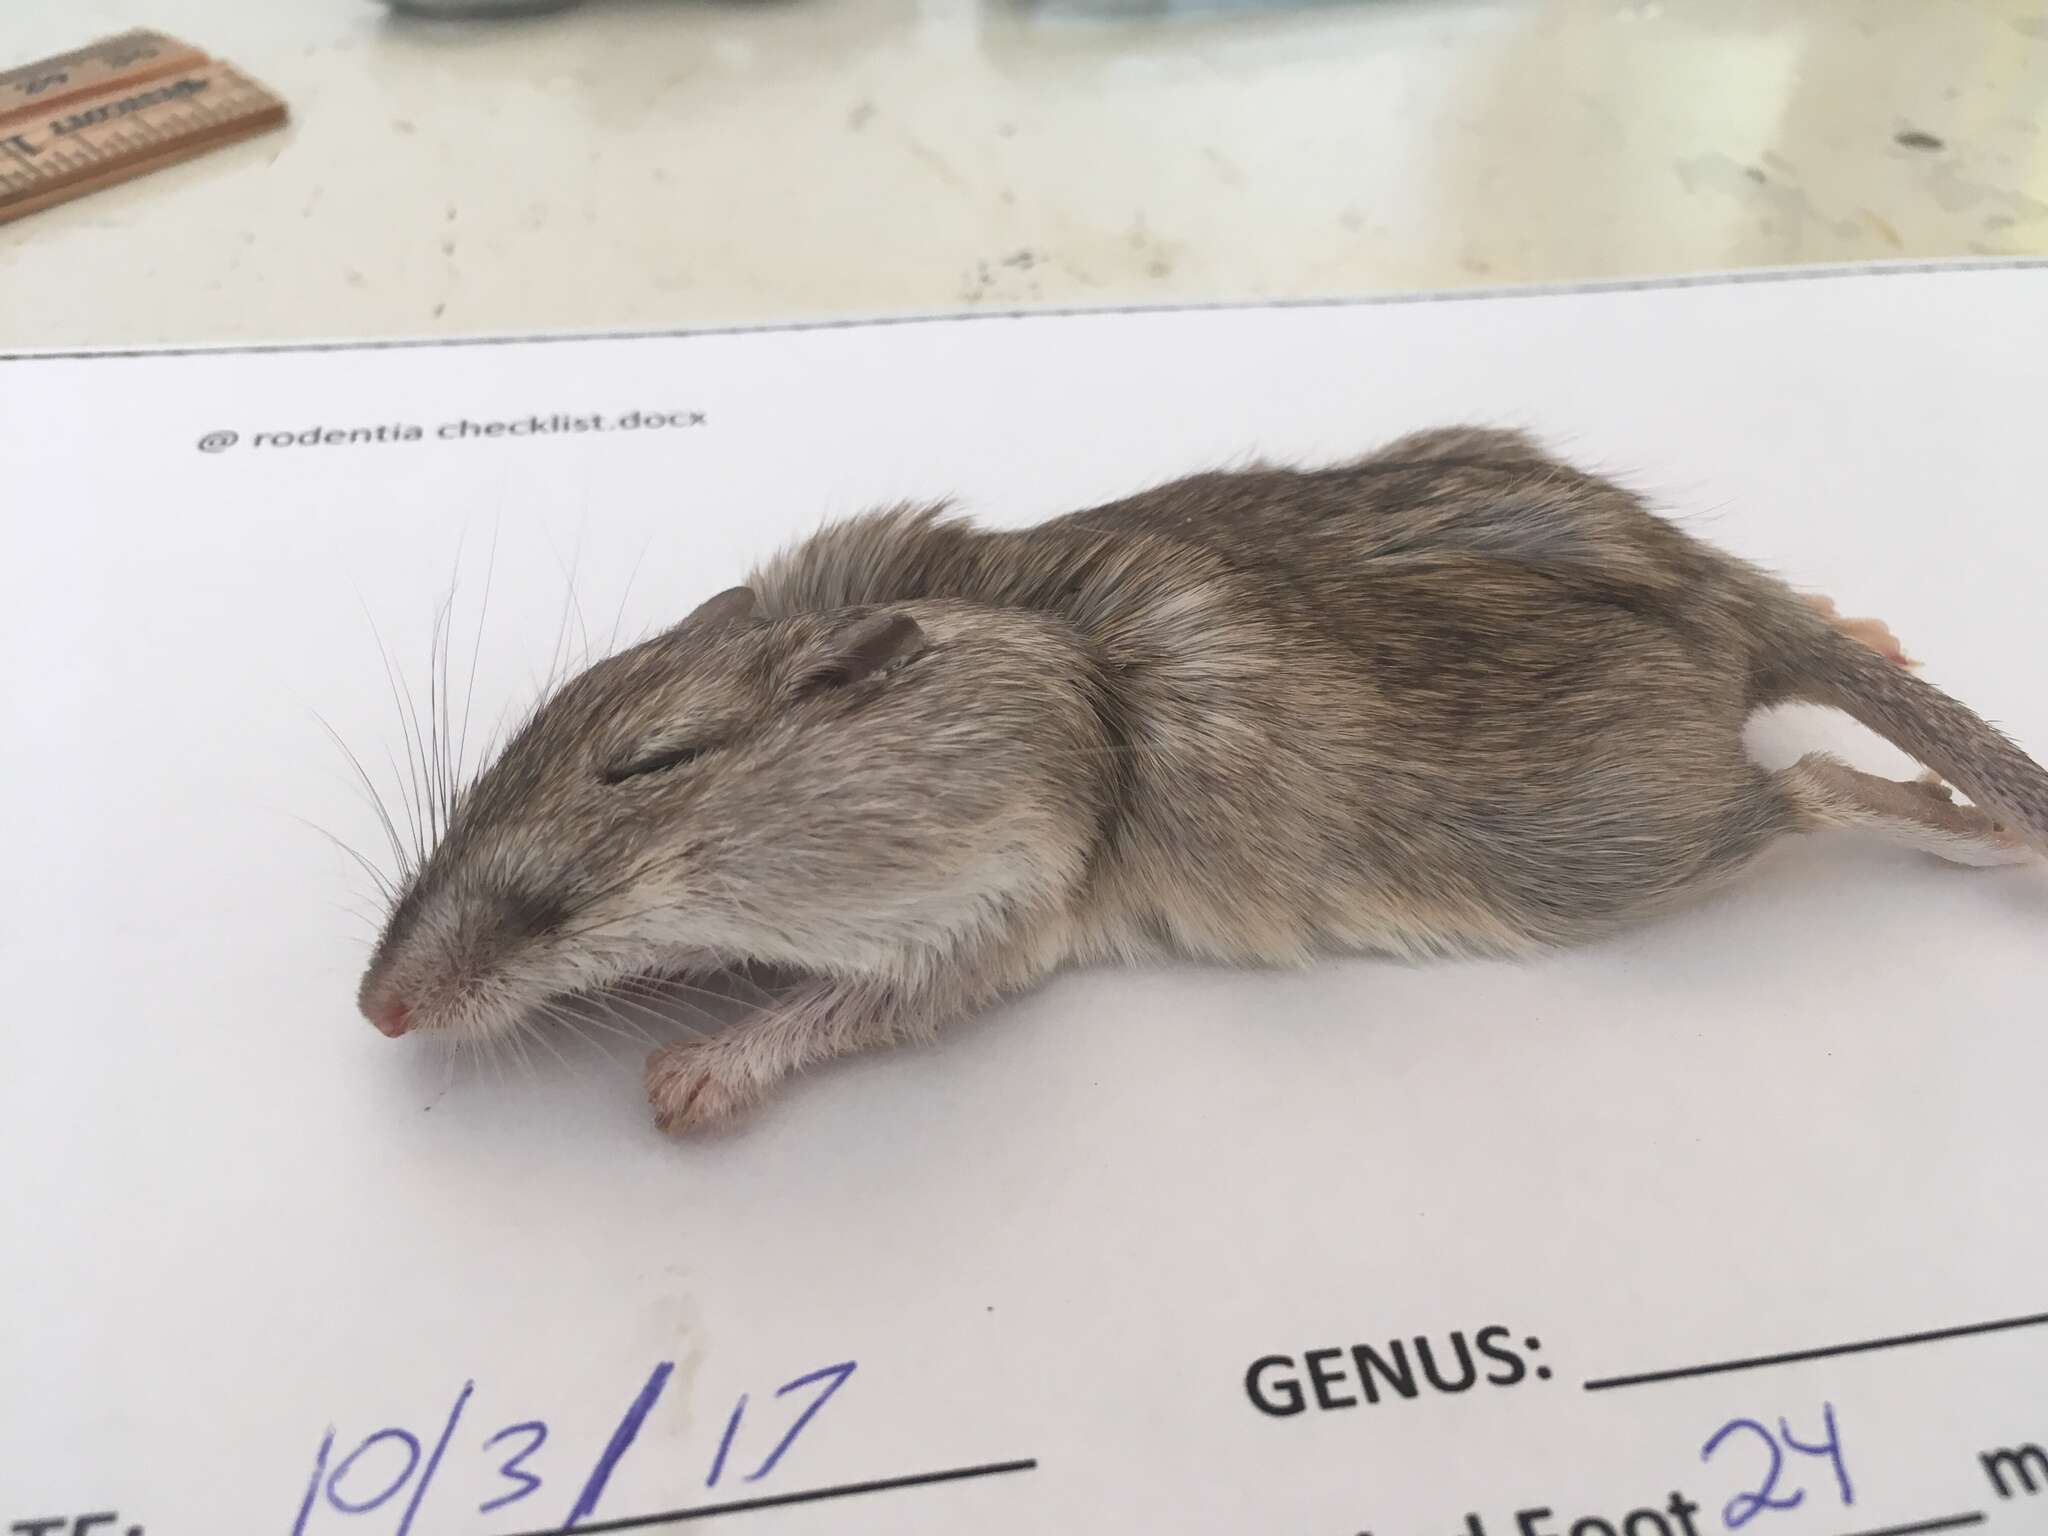 Image of long-tailed pocket mouse